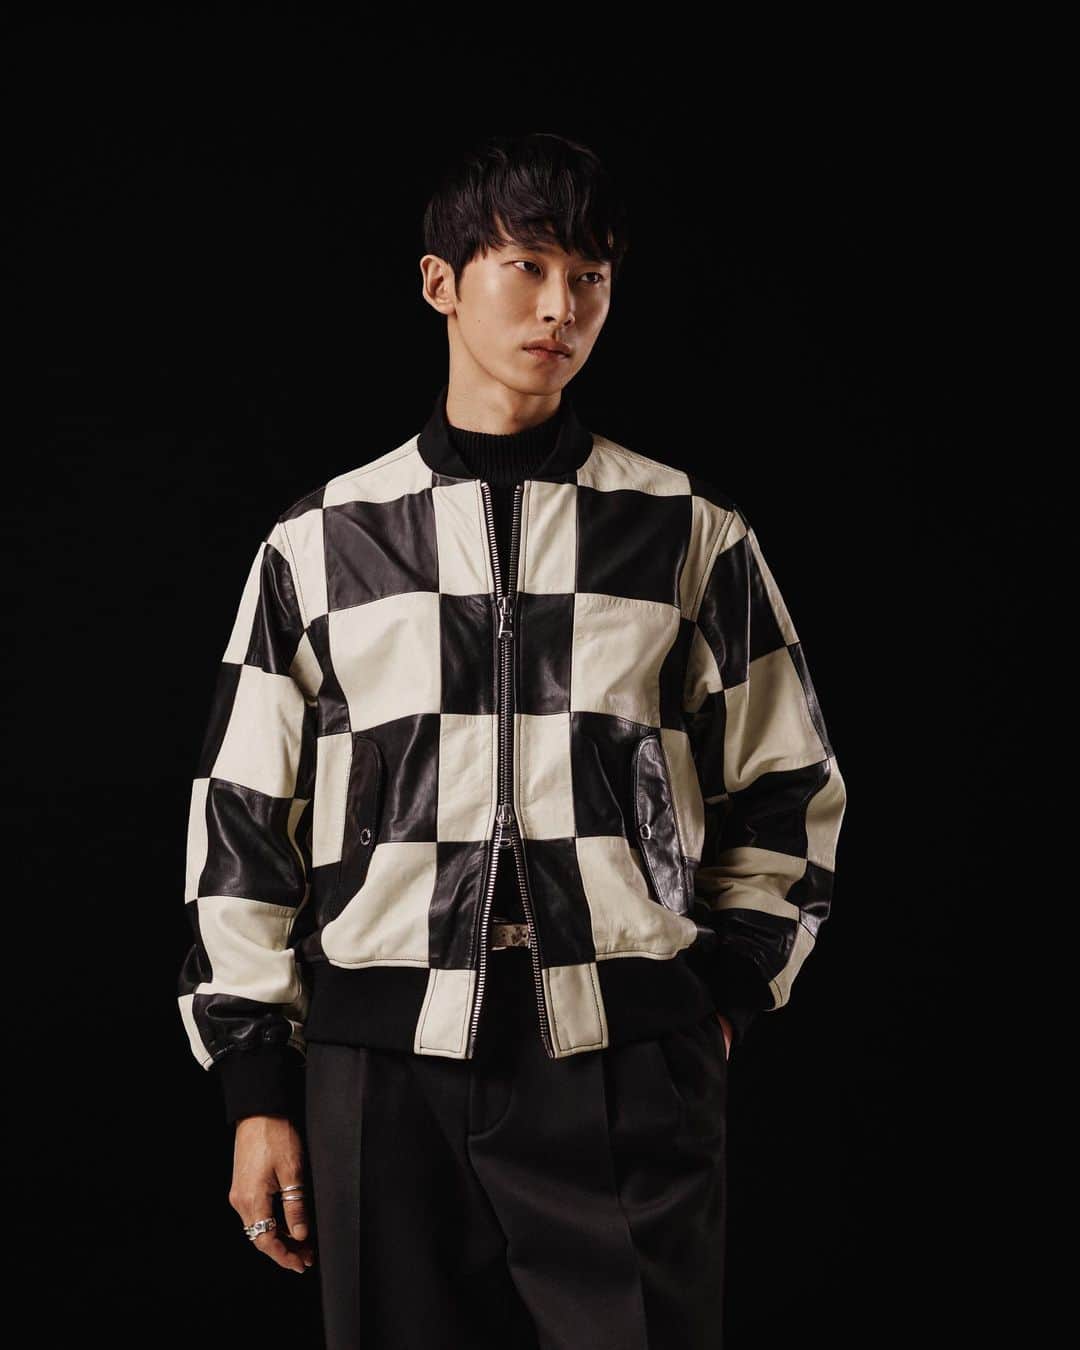 Jリンドバーグのインスタグラム：「Inspired by the soulful music of the 1960s, and the era's menswear silhouettes peppering the energy-packed dancehalls. Shop the new Winter Holiday collection at jlindeberg.com.」